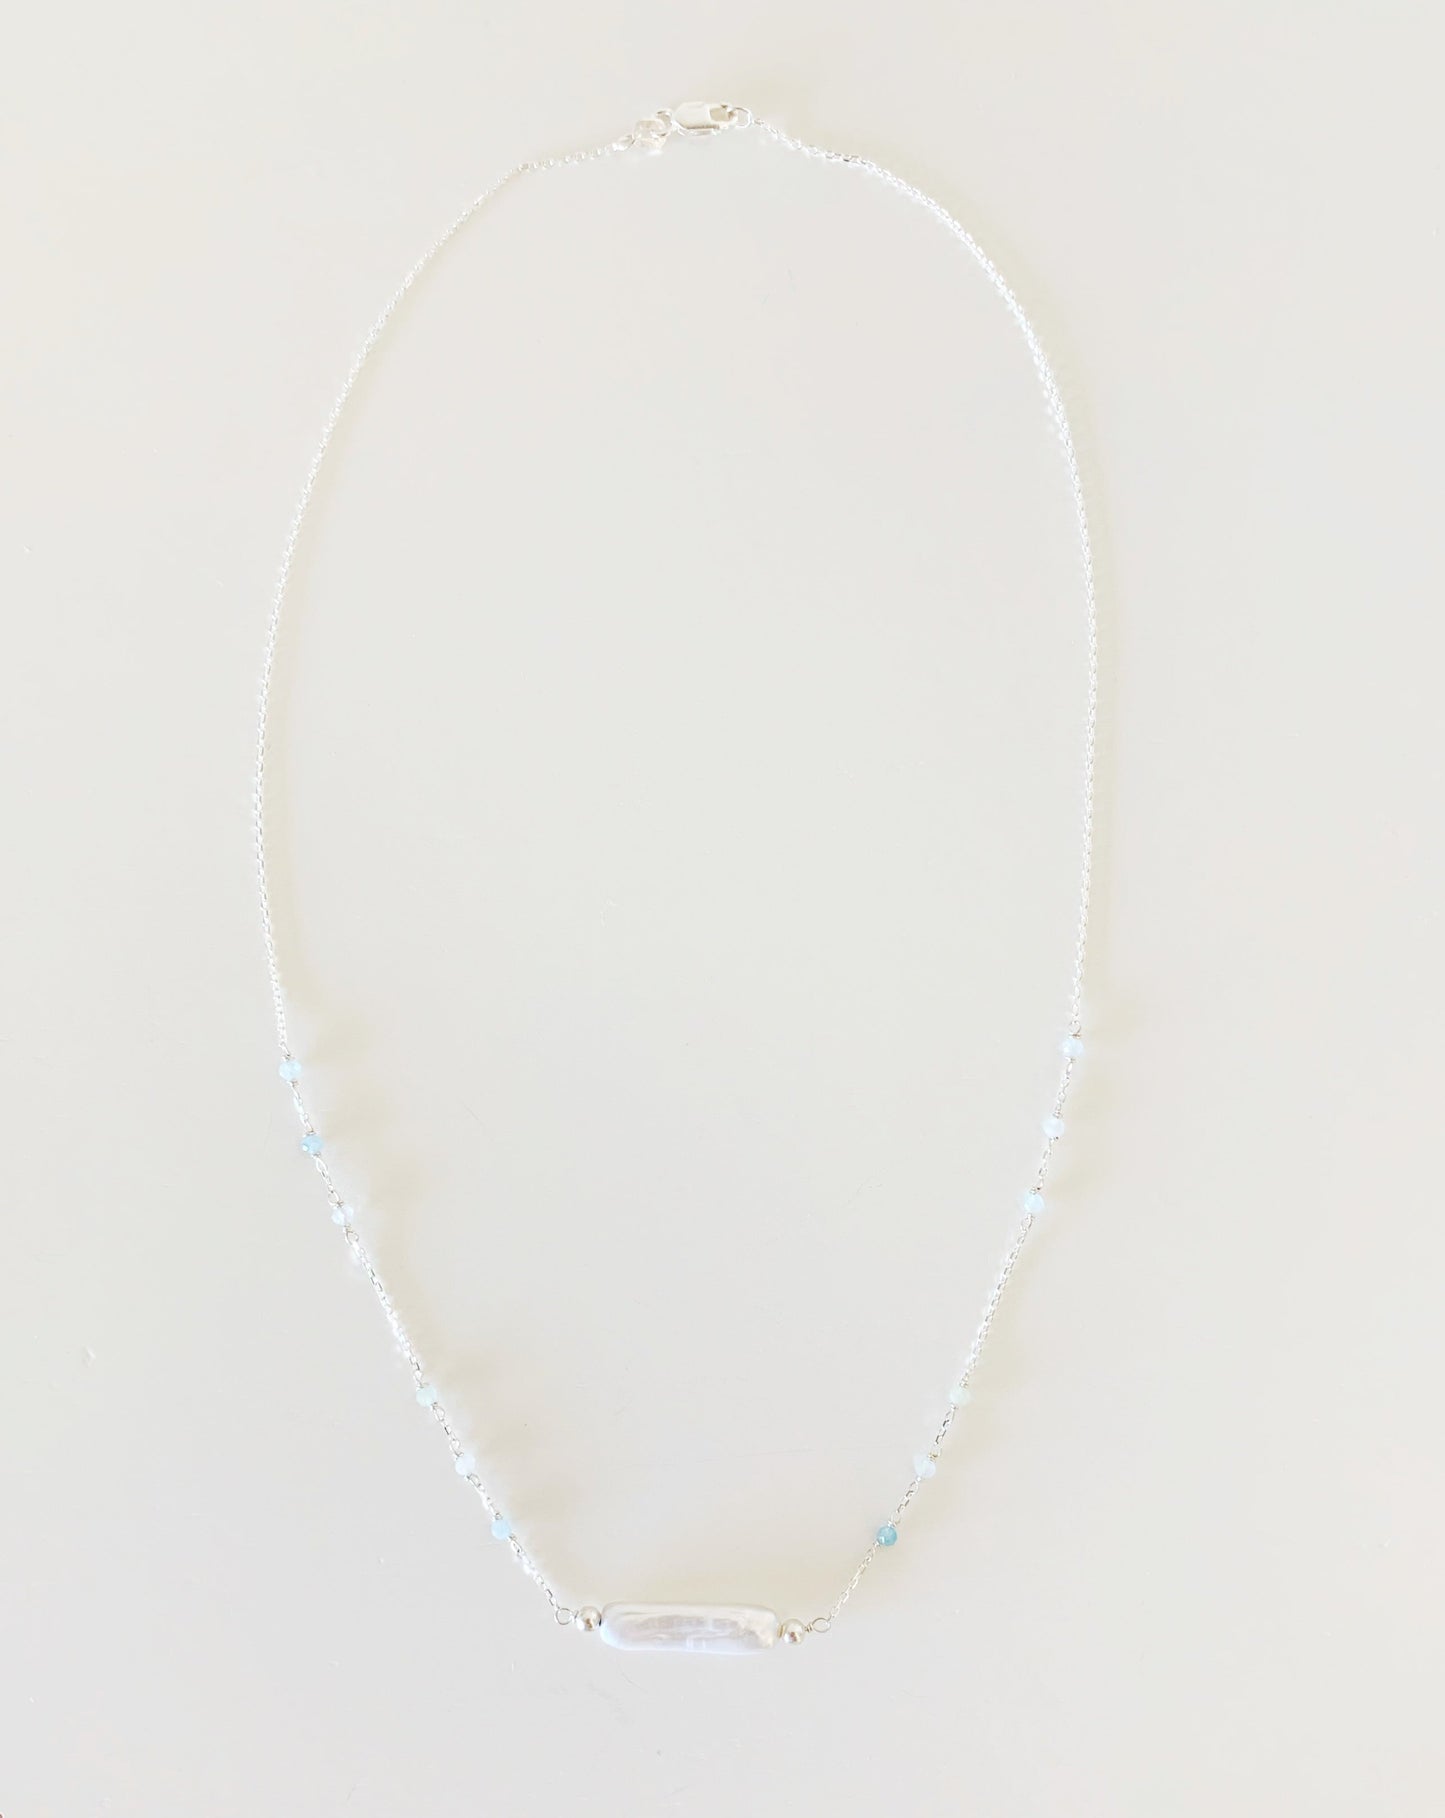 the truro necklace by mermaids and madeleines is created with sterling silver chain dotted with microfaceted aquamarine and with a freshwater stick pearl at the center. this is a full view of the necklace photographed on a white surface